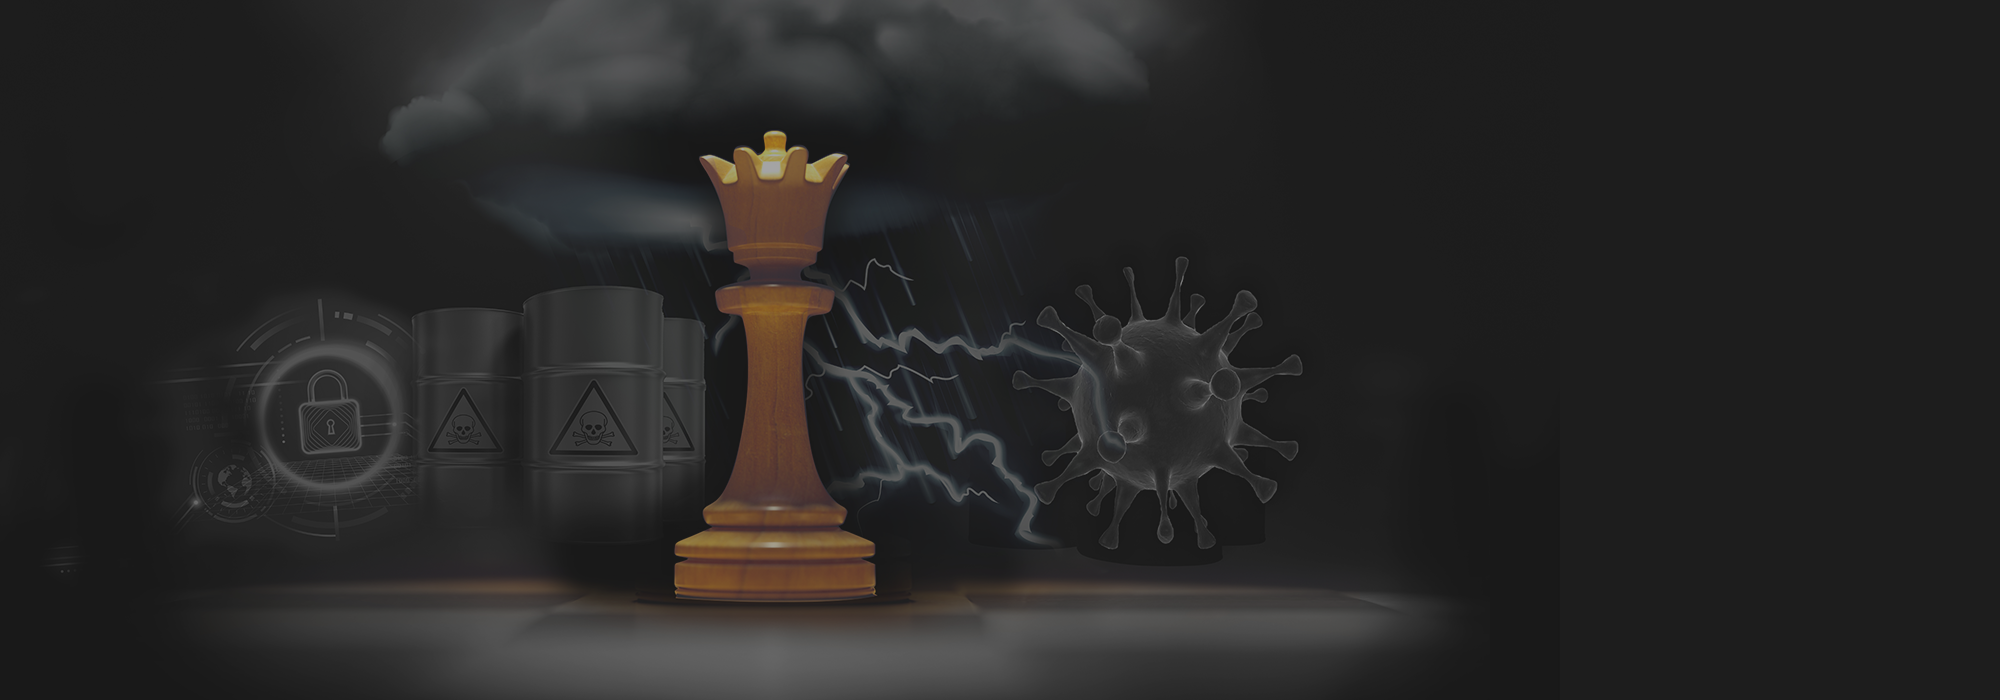 Chess piece with illustrations of various disasters in the background.